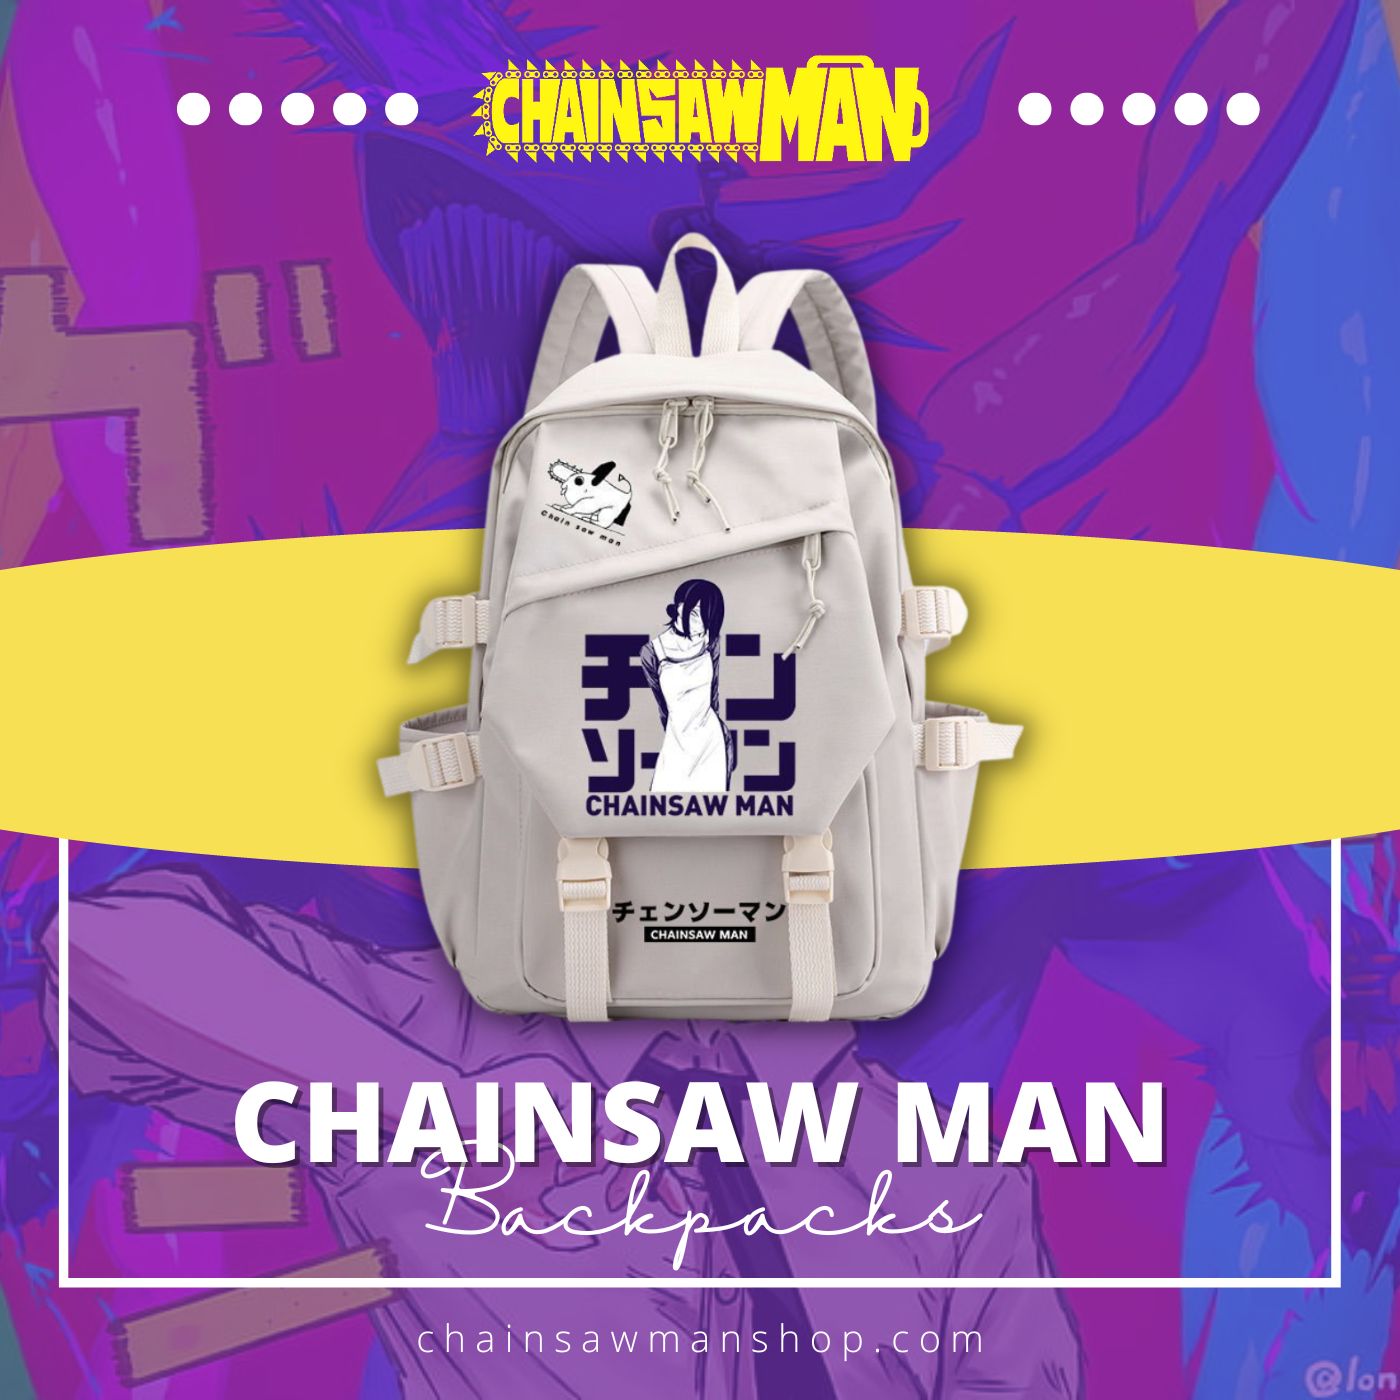 chainsaw man: Which Chainsaw man character are you based on your MBTI?